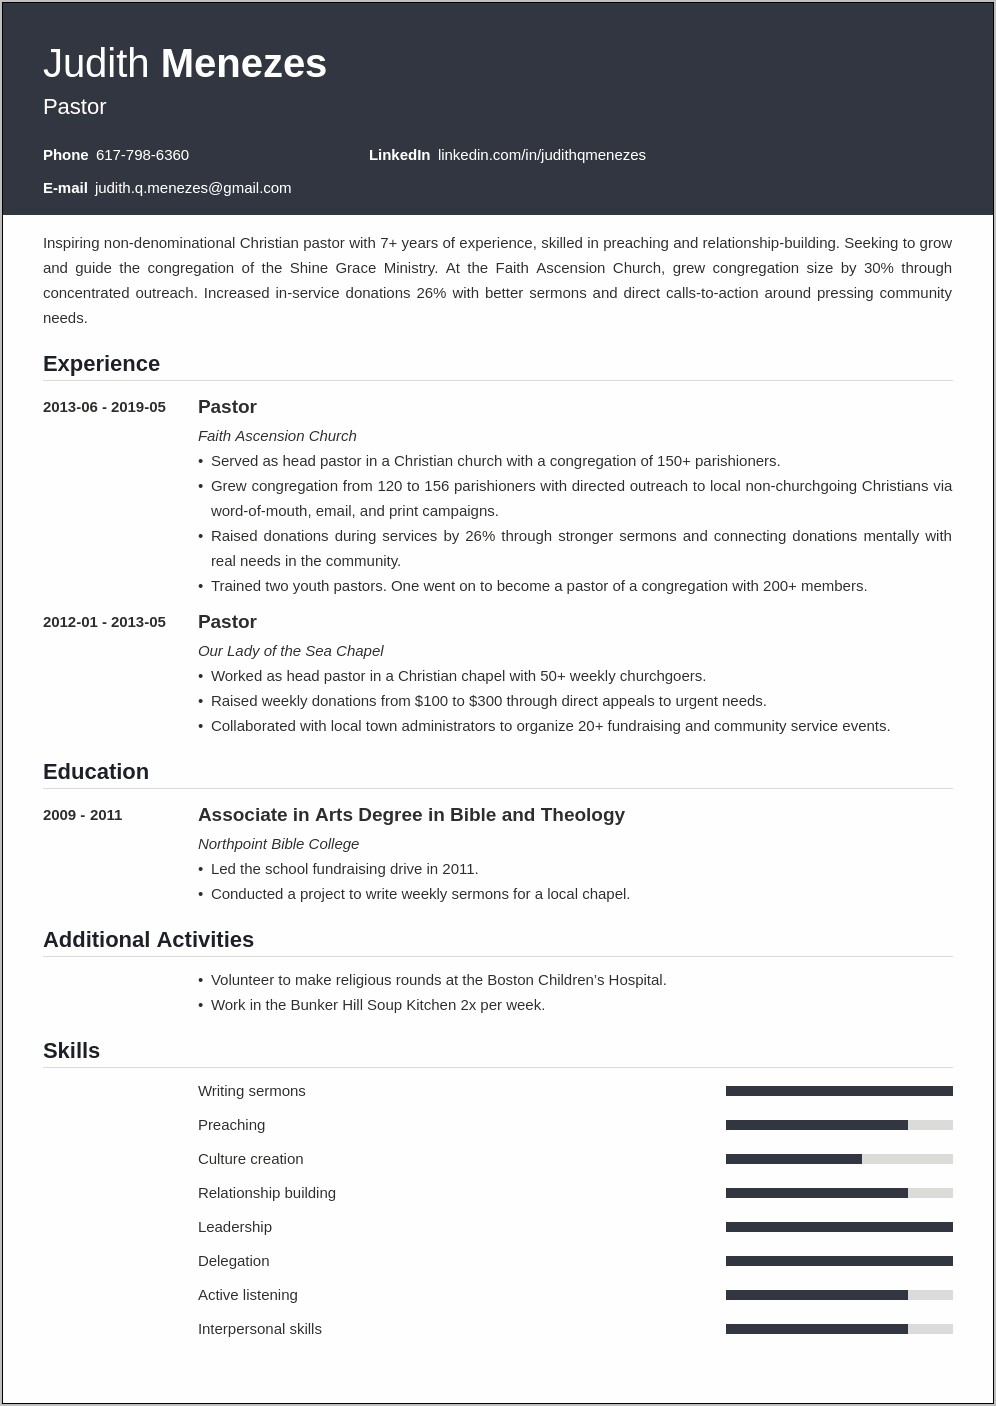 Pastoral Career Objective For Resume